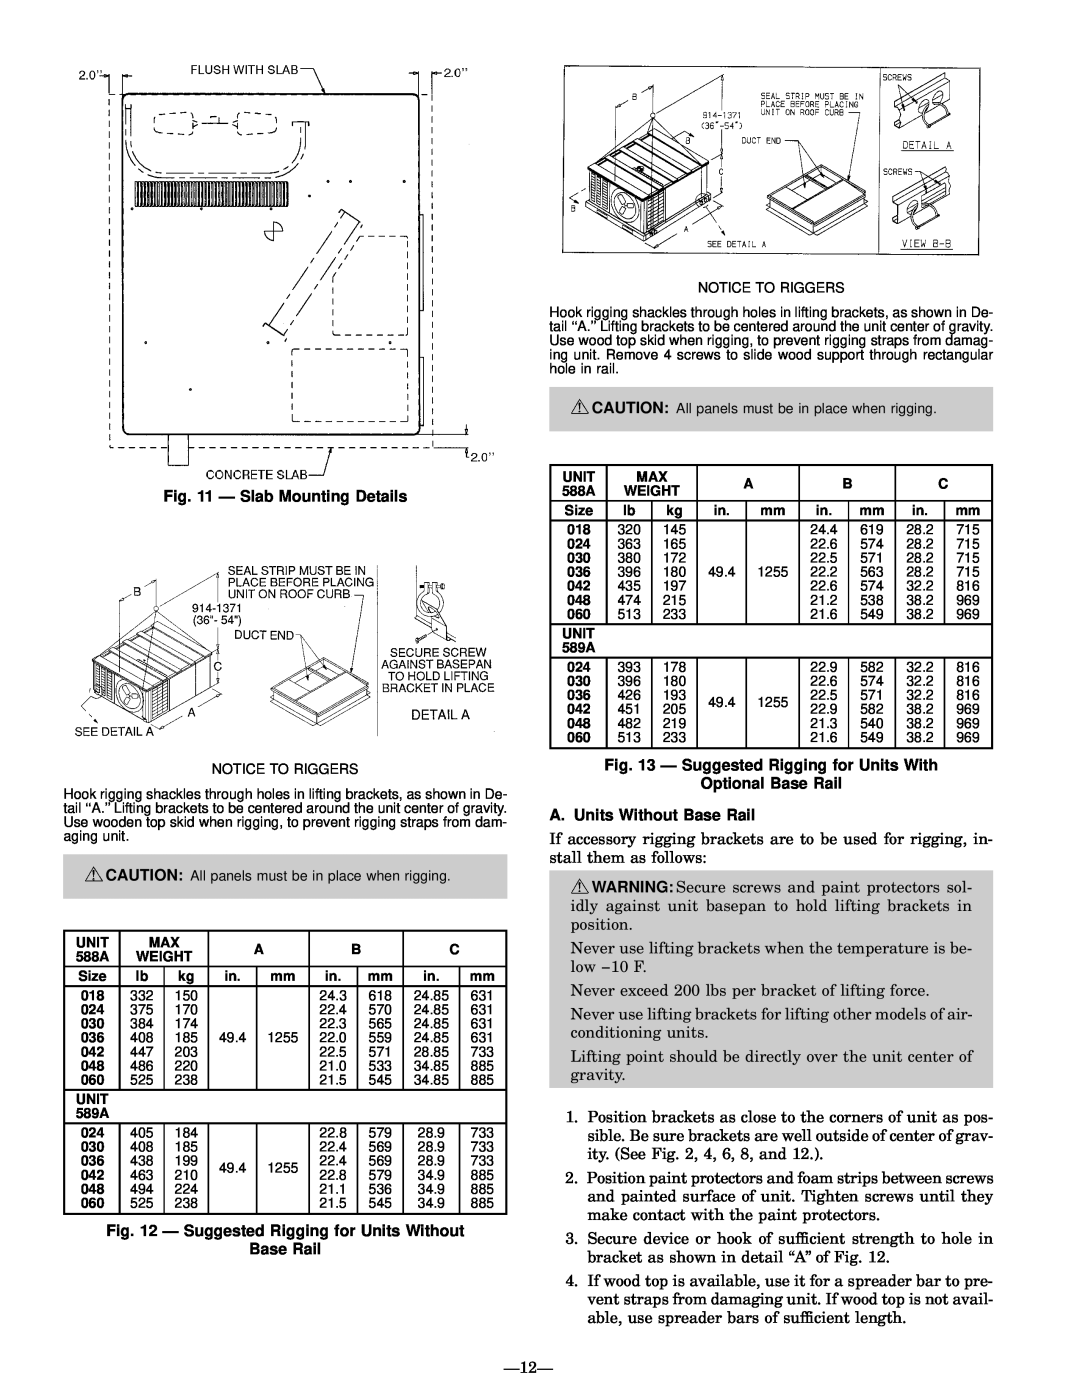 Bryant 588A, 589A user manual Ð Slab Mounting Details, Ð Suggested Rigging for Units Without, Base Rail 